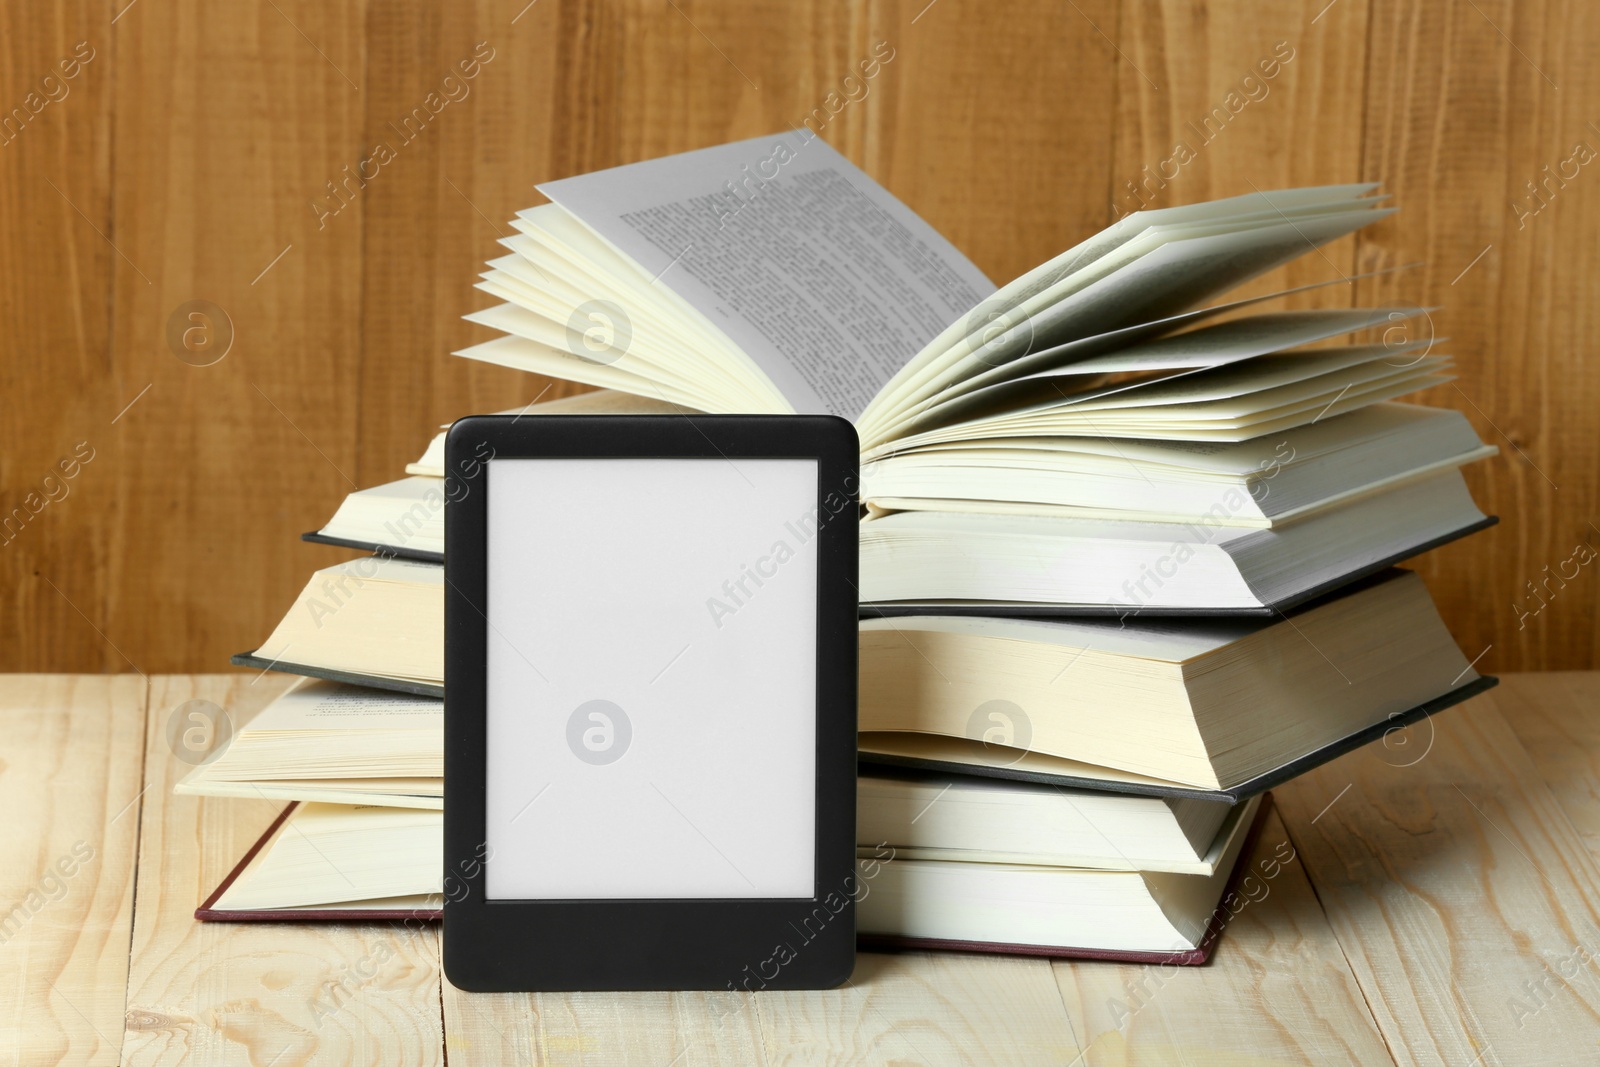 Photo of Portable e-book reader and open hardcover books on wooden table